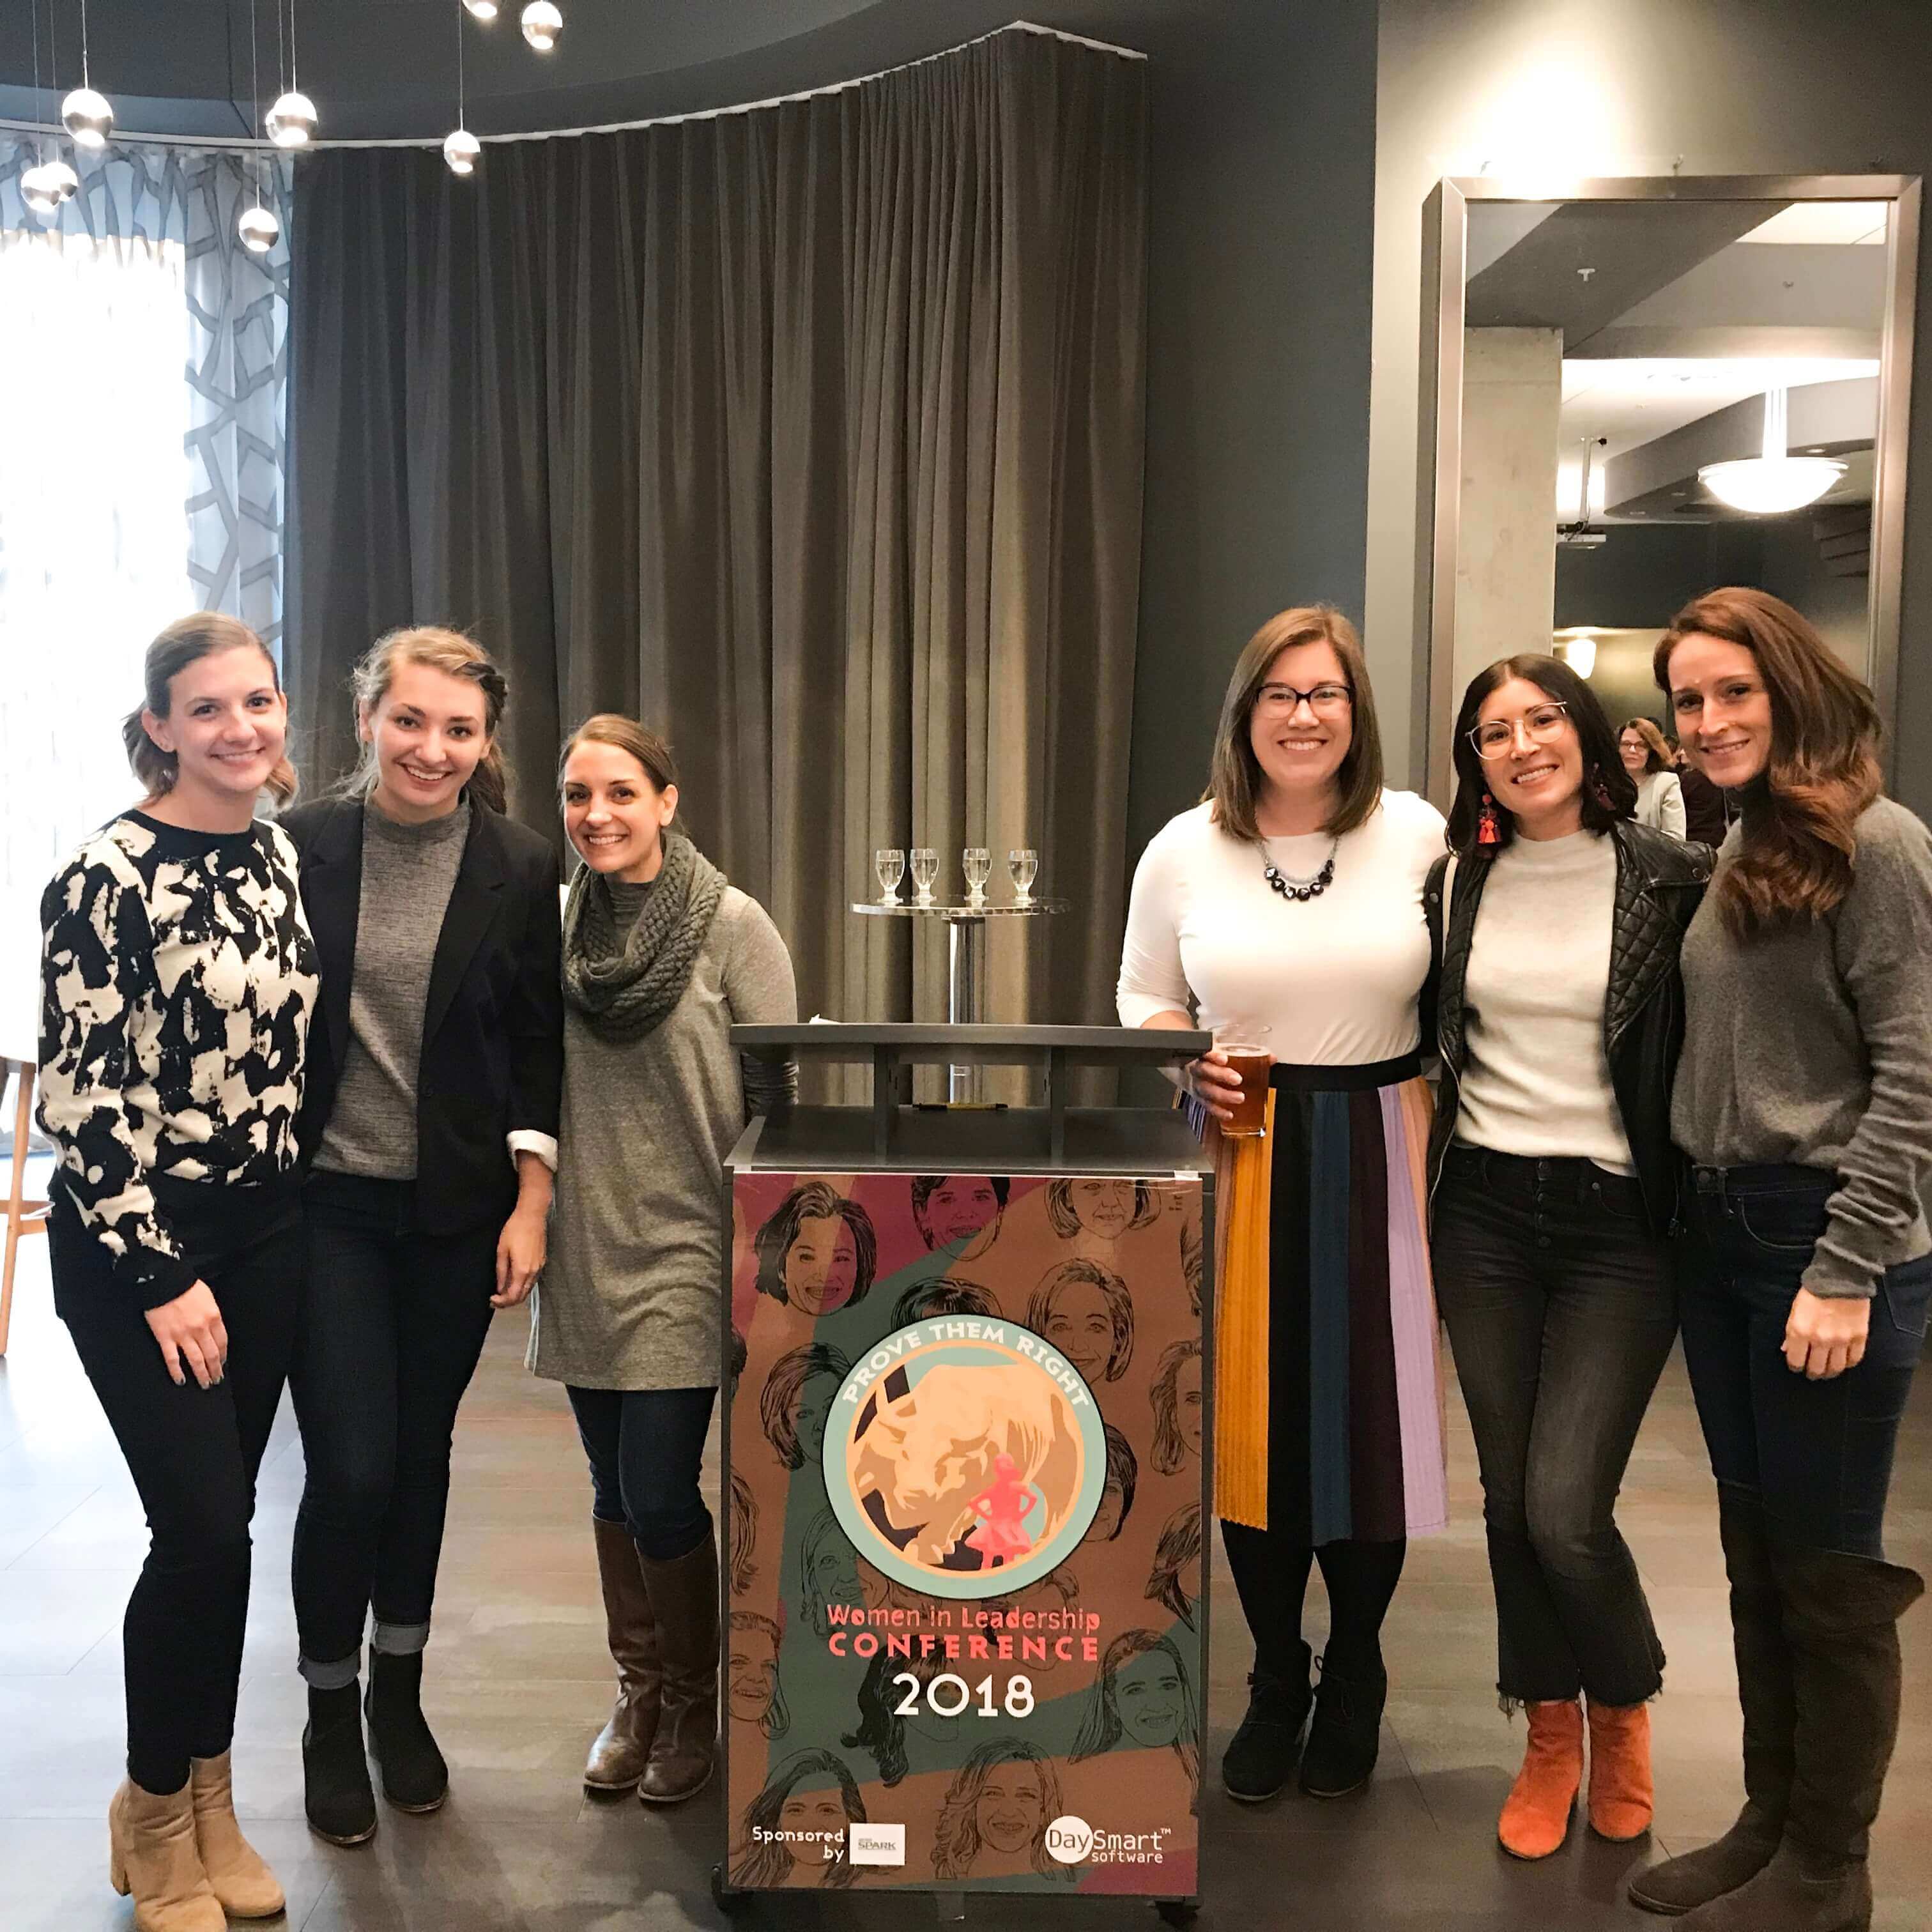 Kristen Violetta, Maria Newton, Andi Nank, Marissa, McIntire, Grace Winkel, and Stephanie Lucido at the Women in Leadership Conference 2018